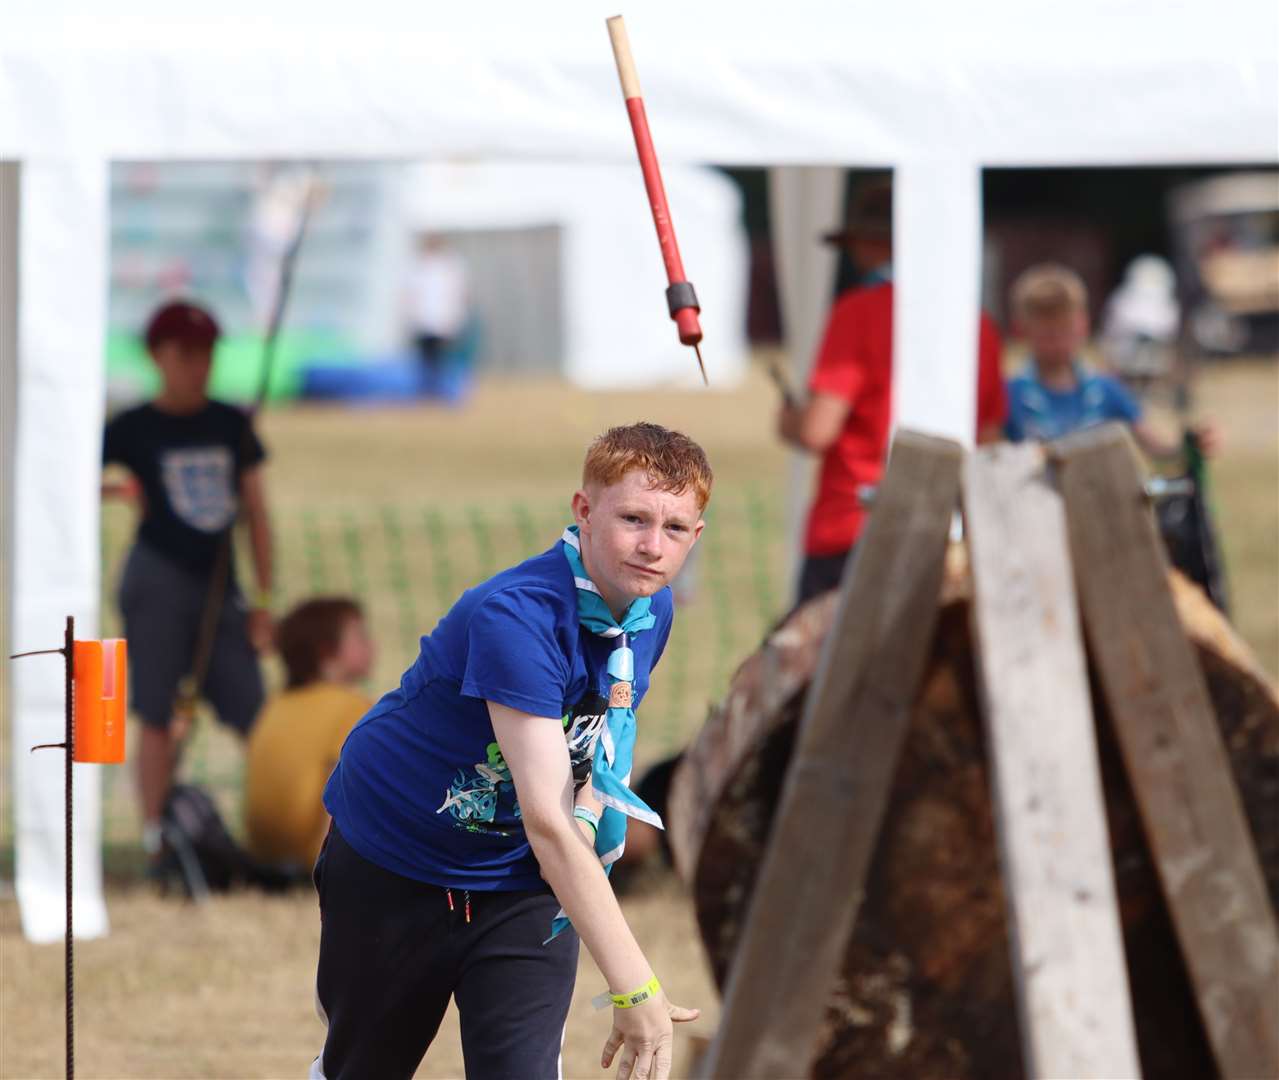 Axe-throwing was among the activities on offer